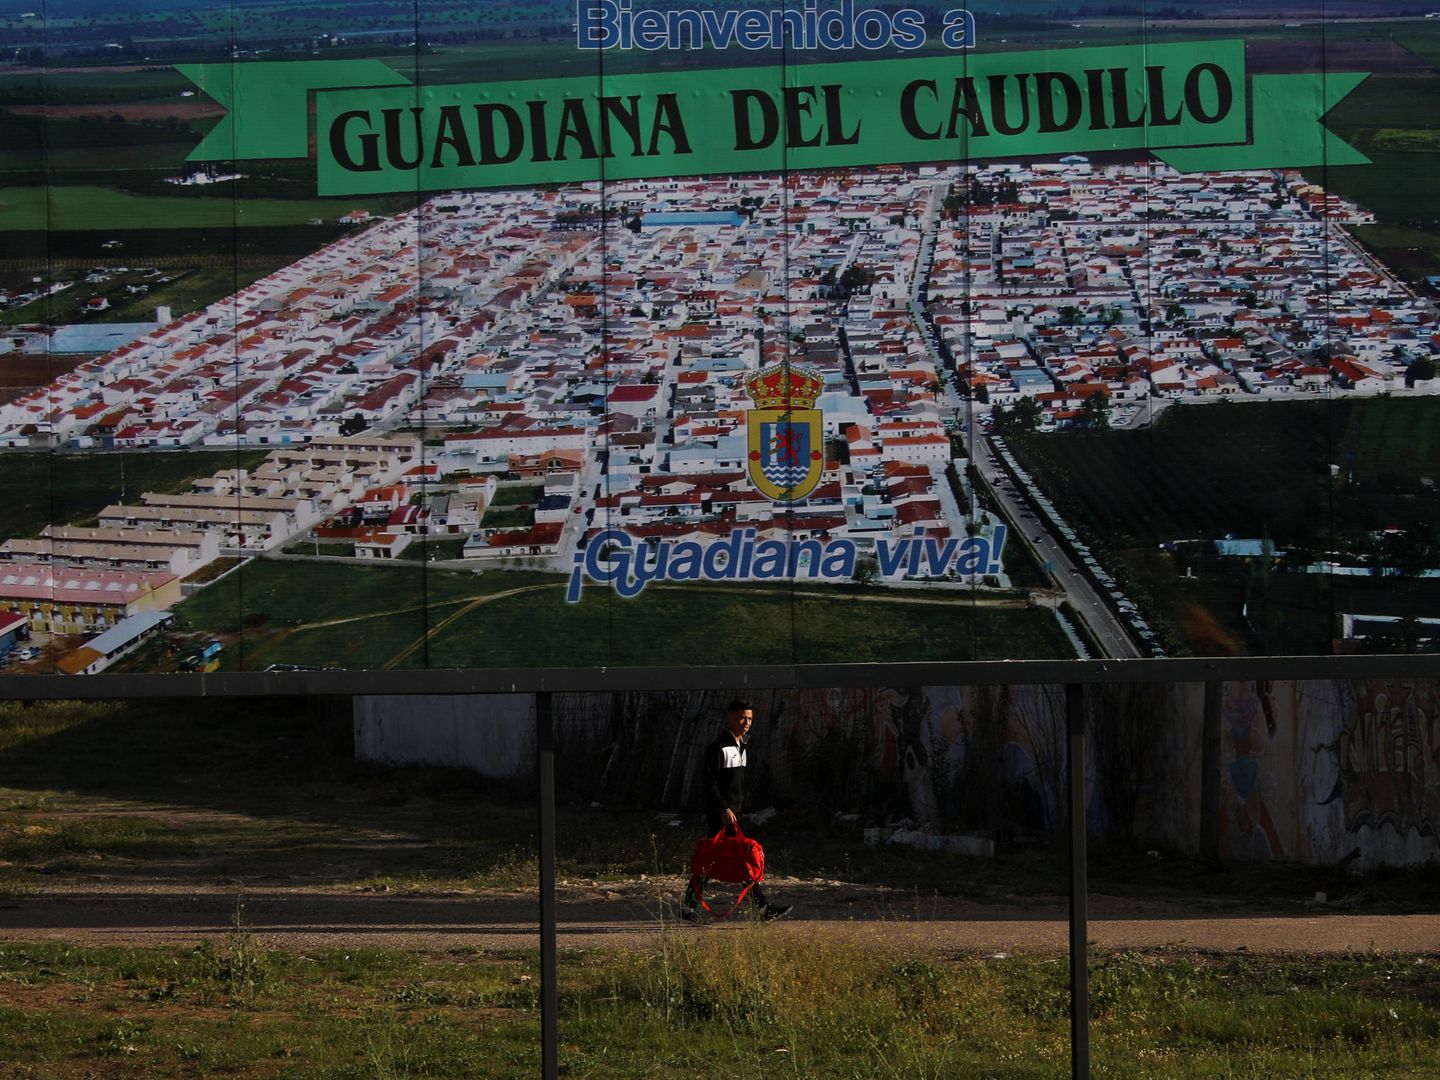 A man walks past a welcome sign at the entrance to Guadiana del Caudillo, Spain, March 30, 2019. Picture taken March 30, 2019. REUTERS Susana Vera